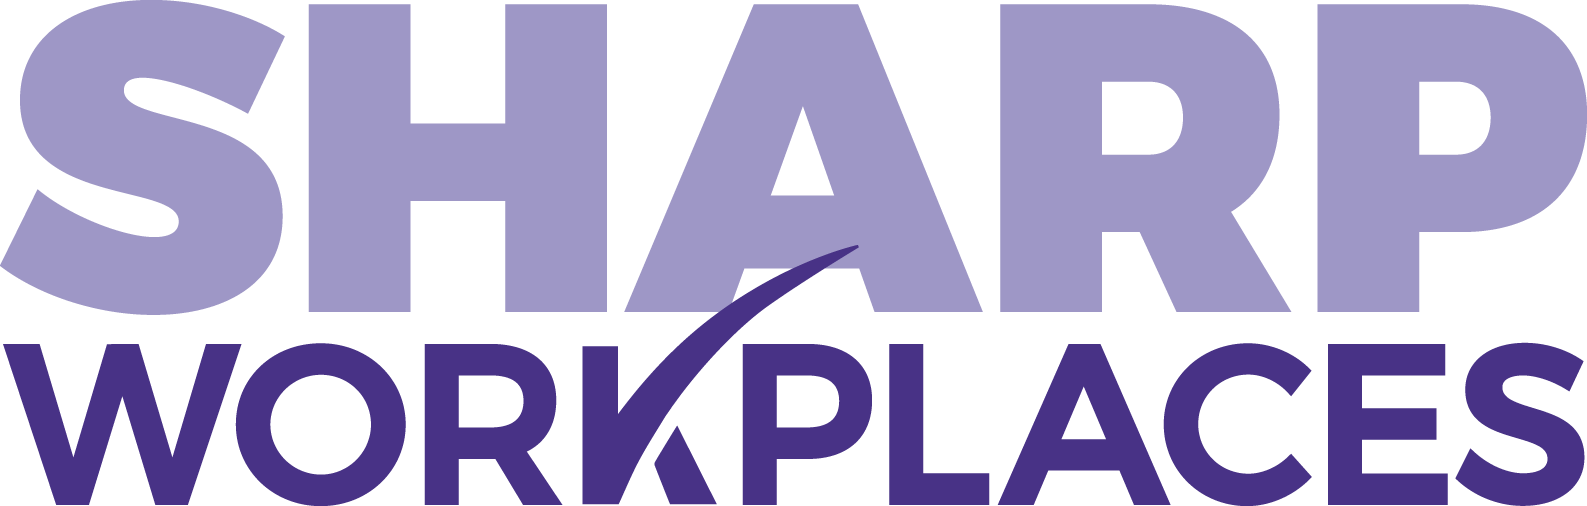 SHARP Workplaces logo with large purple letters